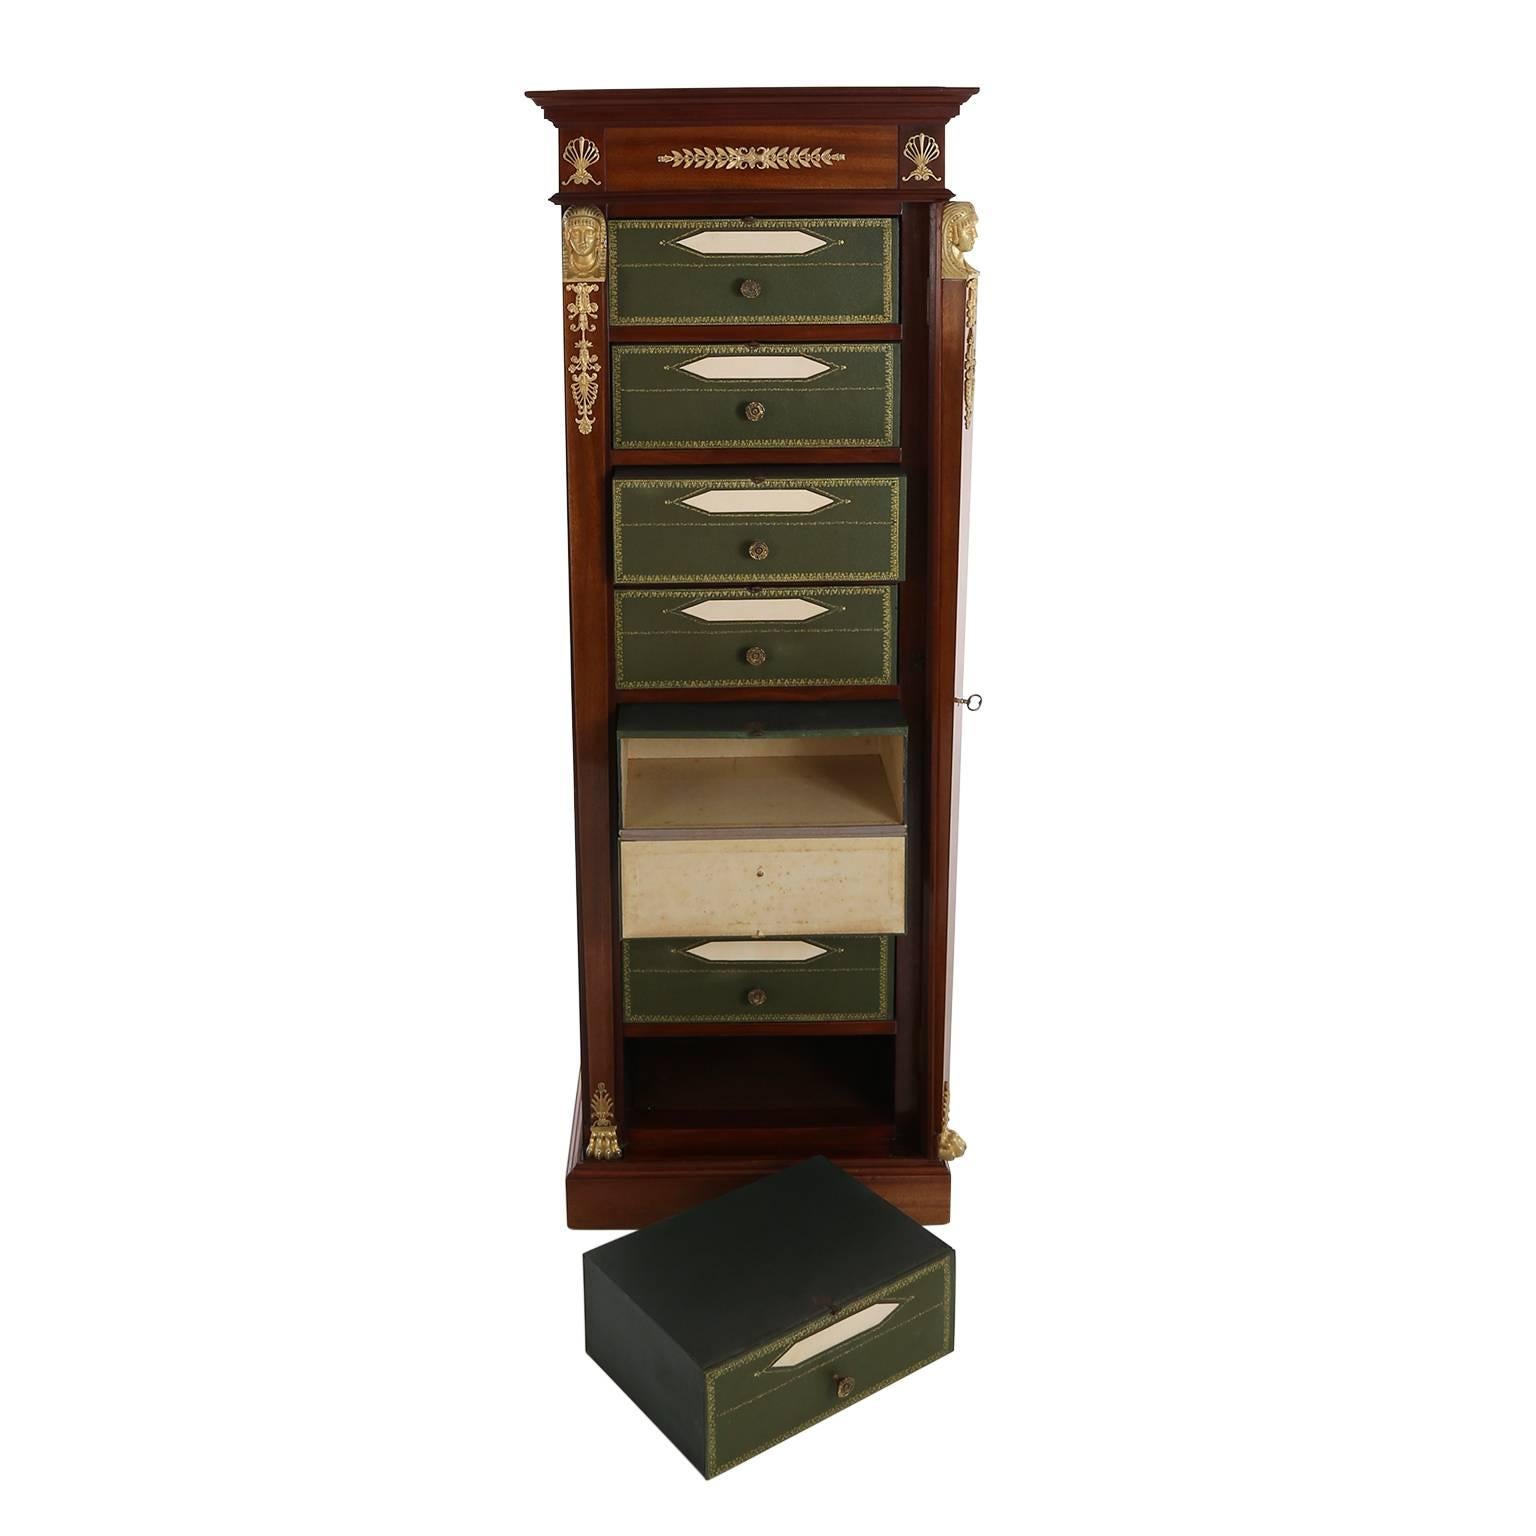 Rare 19th century Empire cartonnier with mahogany veneer and six pull-out boxes, covered in green with gold ornaments. Framed by gilt fittings in Egyptian style with sphinxes. Hidden in the lid several hidden compartments with unusual mechanics.
   